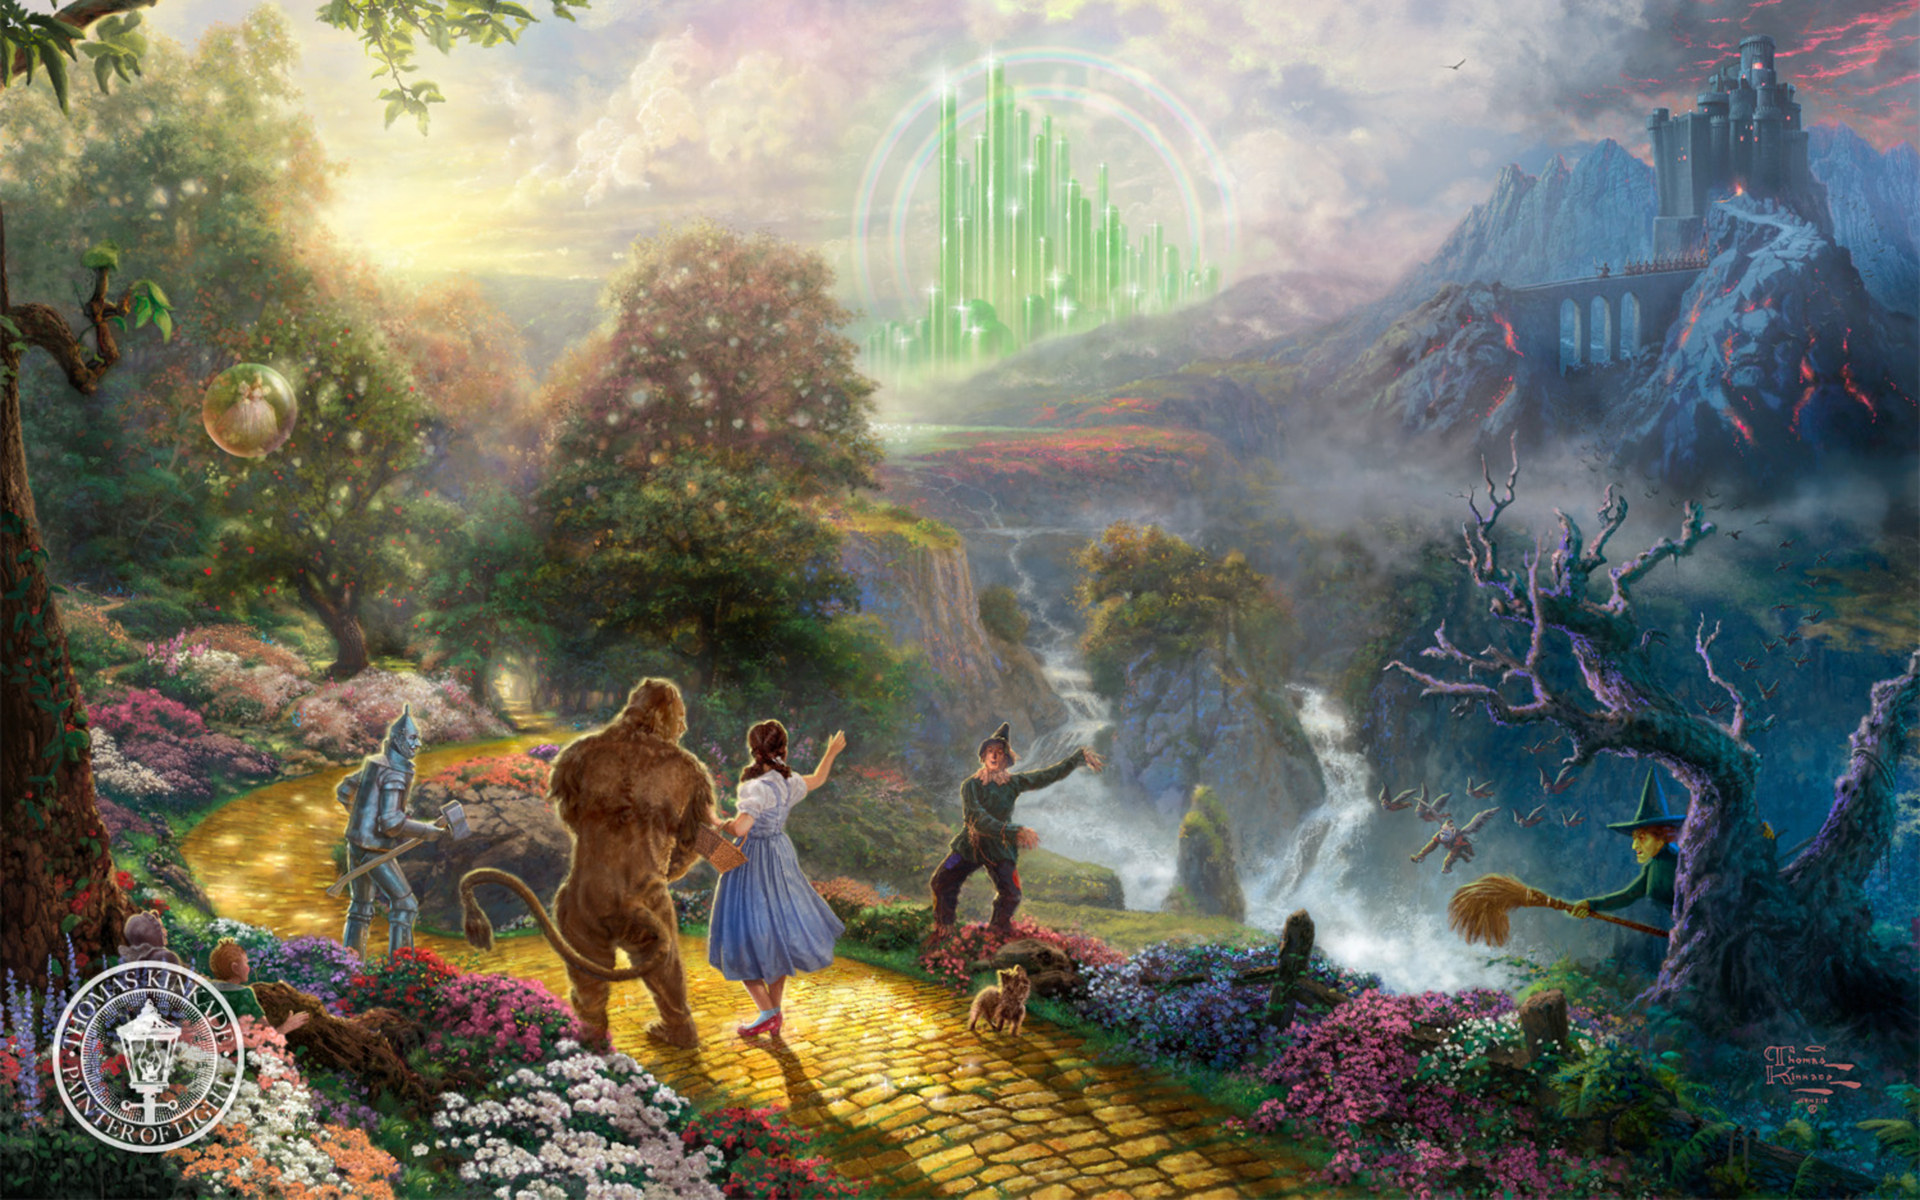 The Wizard Of Oz Wallpaper